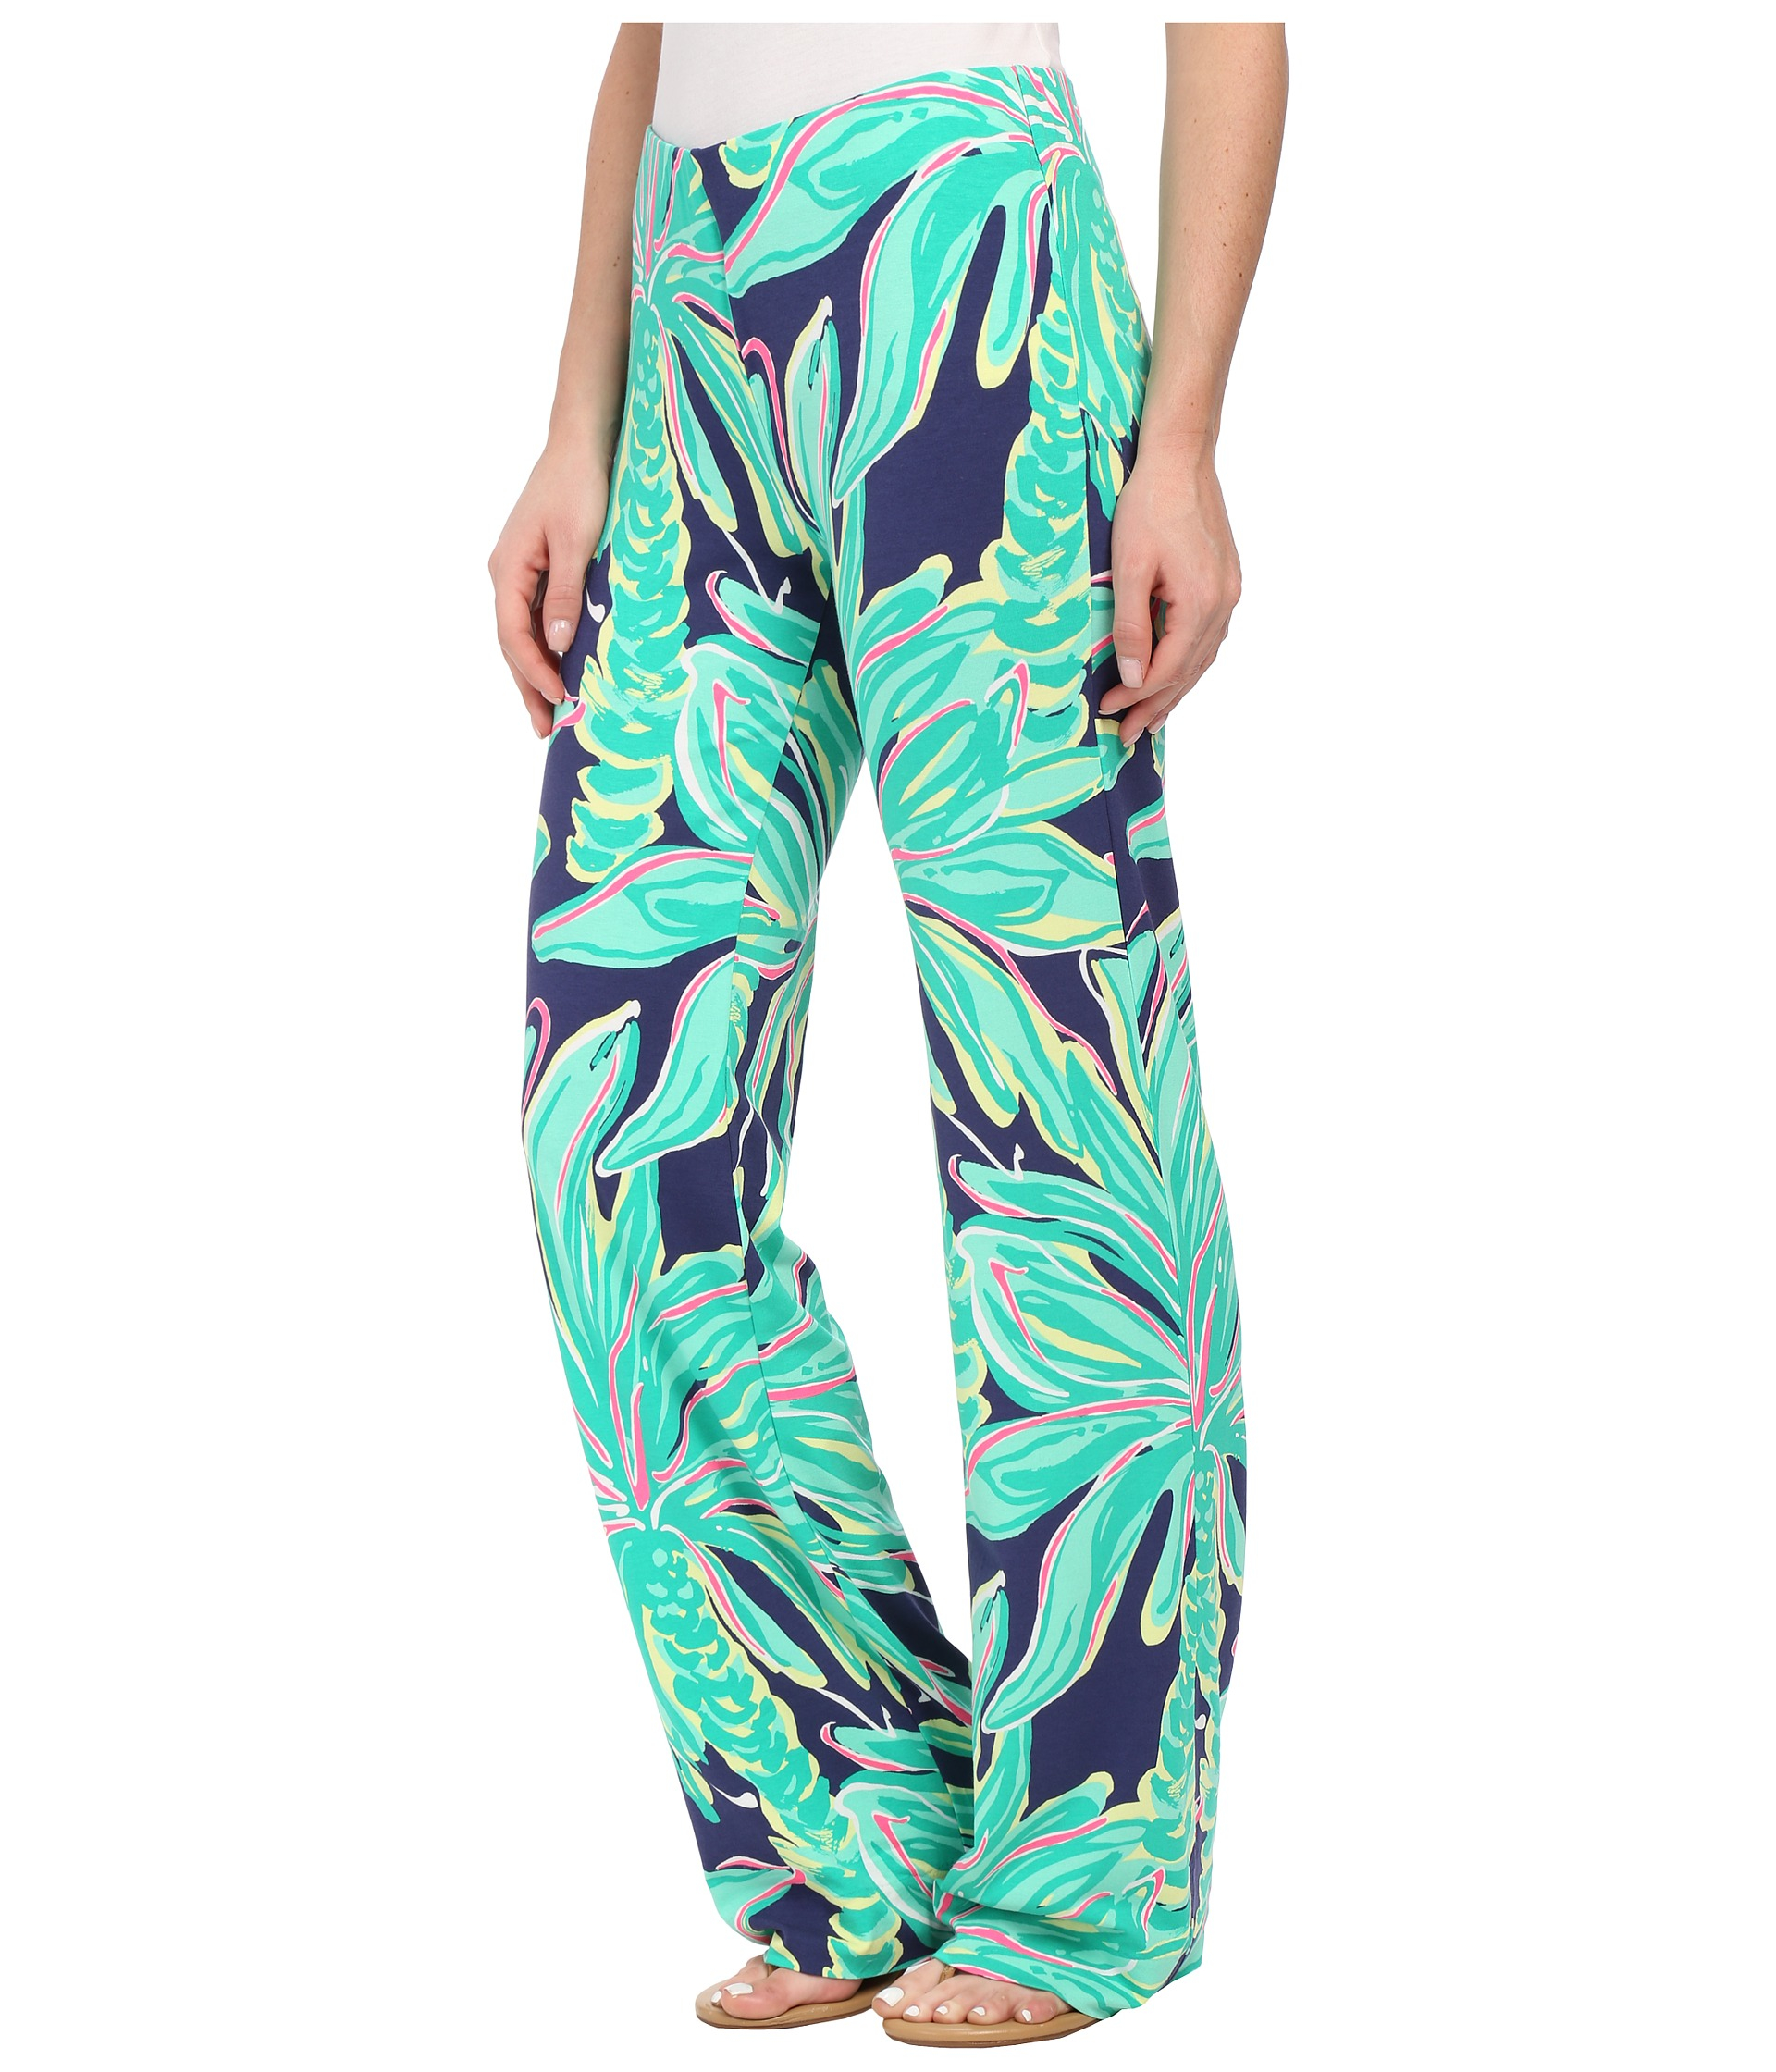 Lyst - Lilly Pulitzer Georgia May Palazzo in Blue